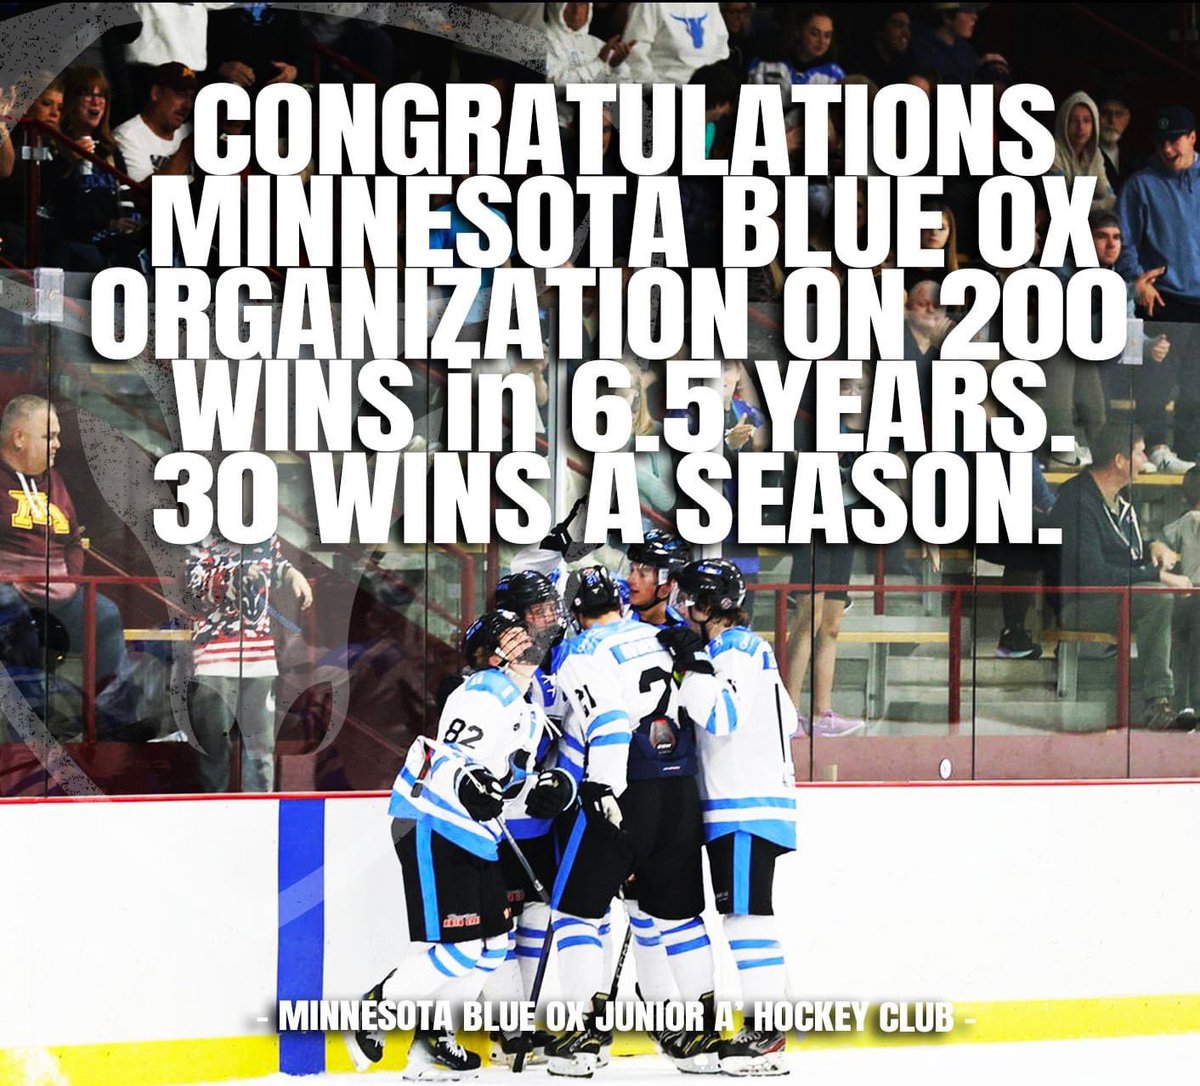 CONGRATS TO THE MN BLUE OX JR. A' HOCKEY CLUB!

200 wins in 6.5 years of USPHL play....We have accomplished this all by staying true to our 'Players First' mission.

* 30 Wins A Season
* 1 NHL Rookie Camp
* 3 Nattys in 6 years
* 25+ Advanced to College 

@USPHL @The_DanKShow